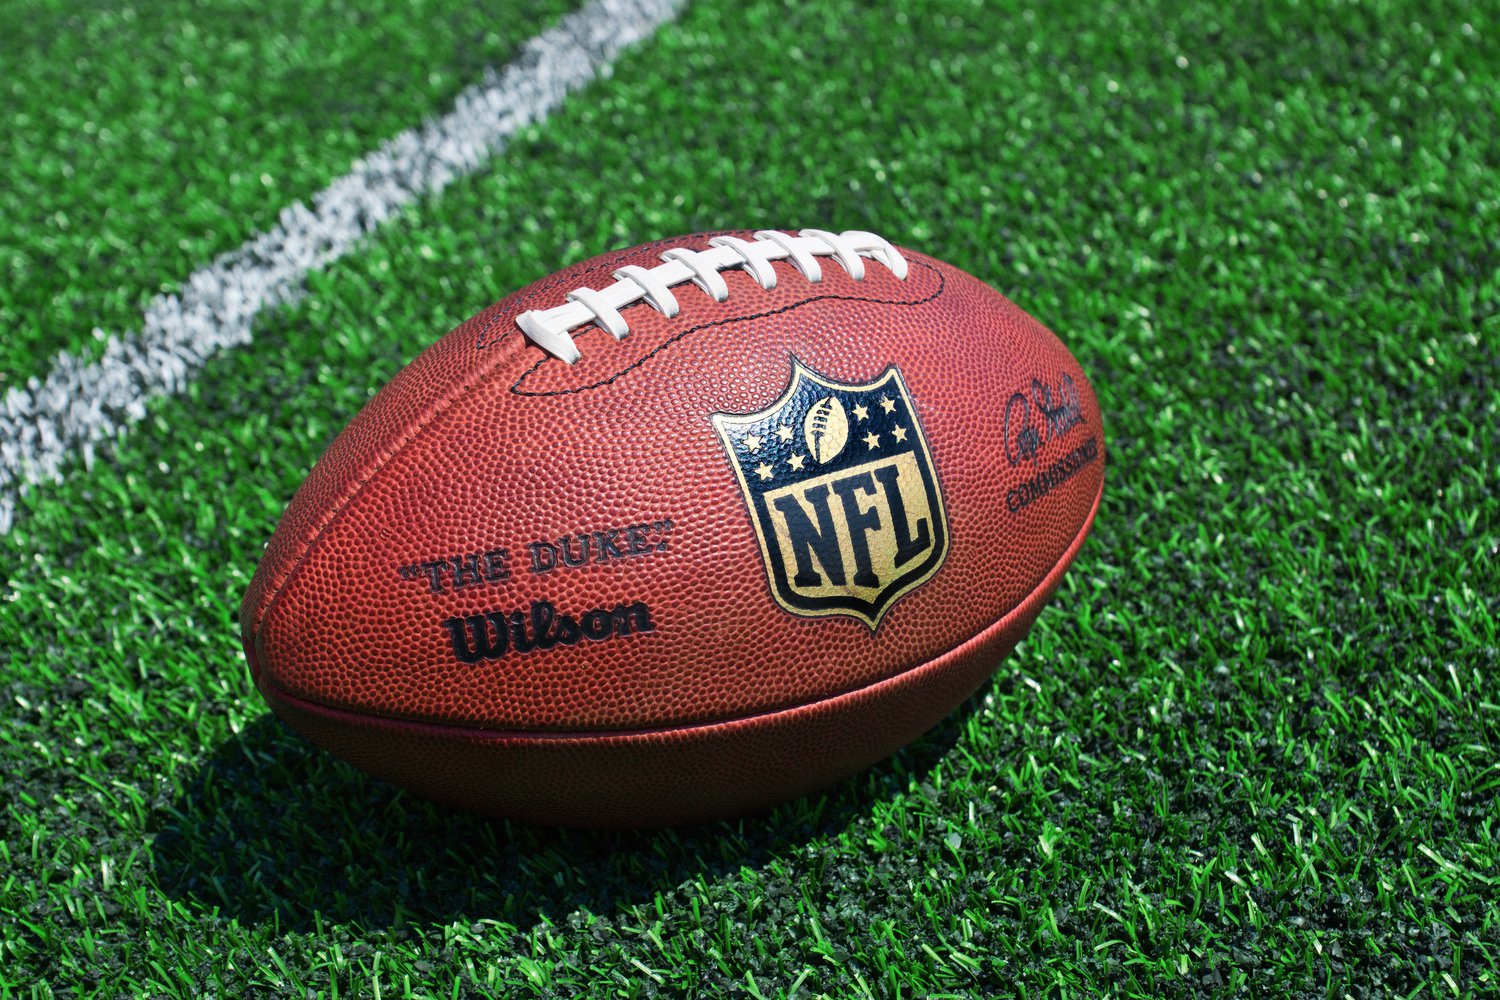 NFL Players Union Strikes Deal To Help Athletes To Earn Crypto